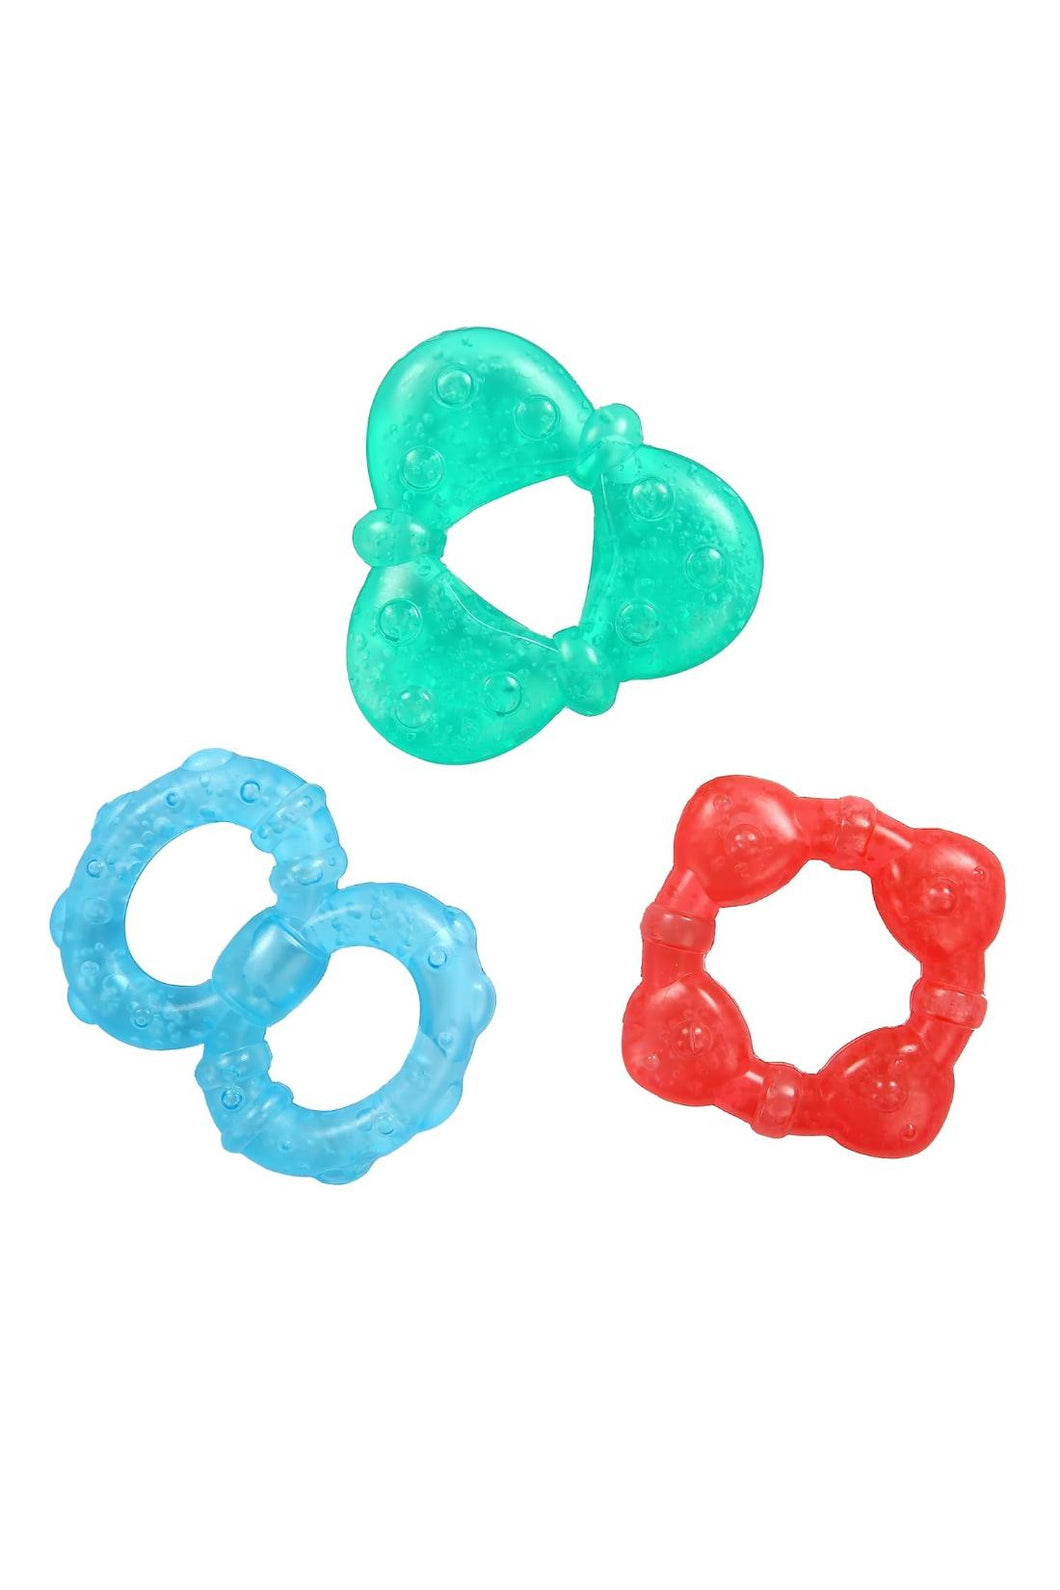 Bright Starts Stay Cool Teethers Gel-Filled - 3 Pack